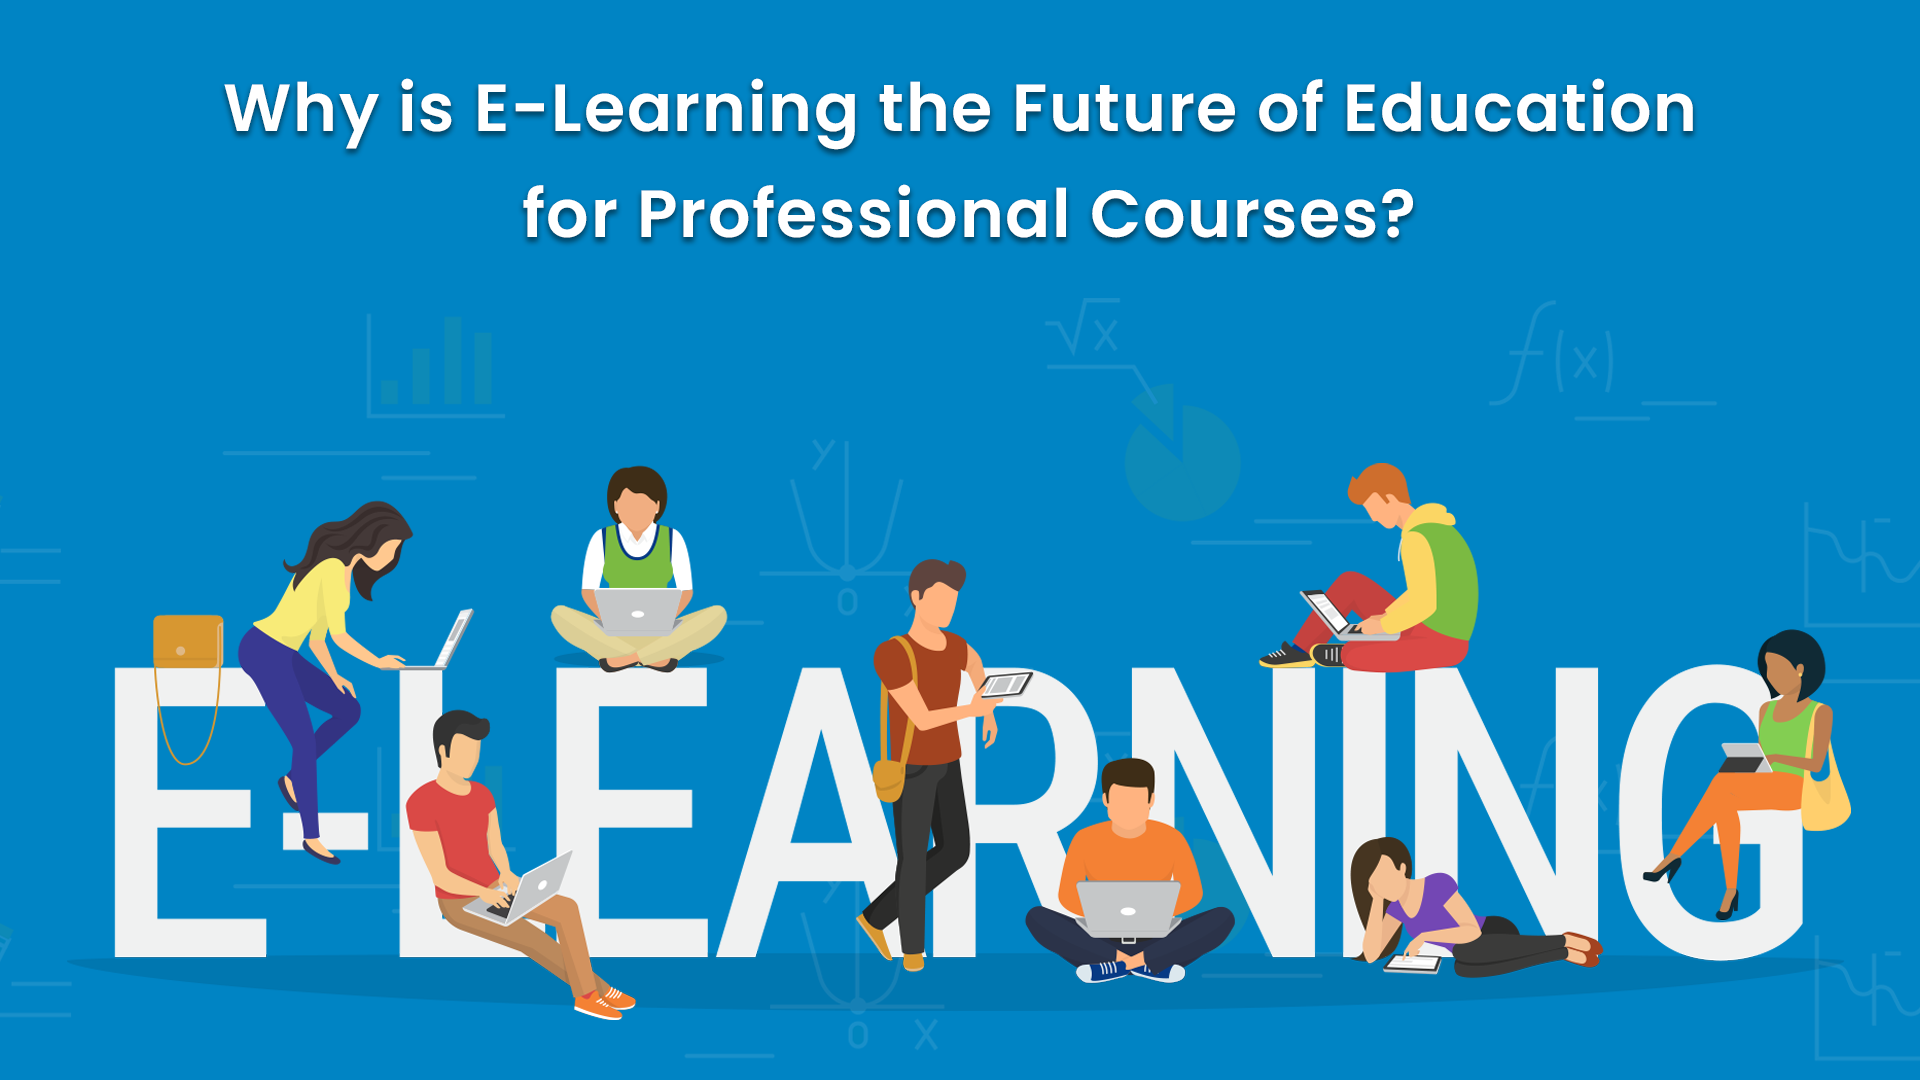 Why is e-Learning the Future of Education for Professional Courses?